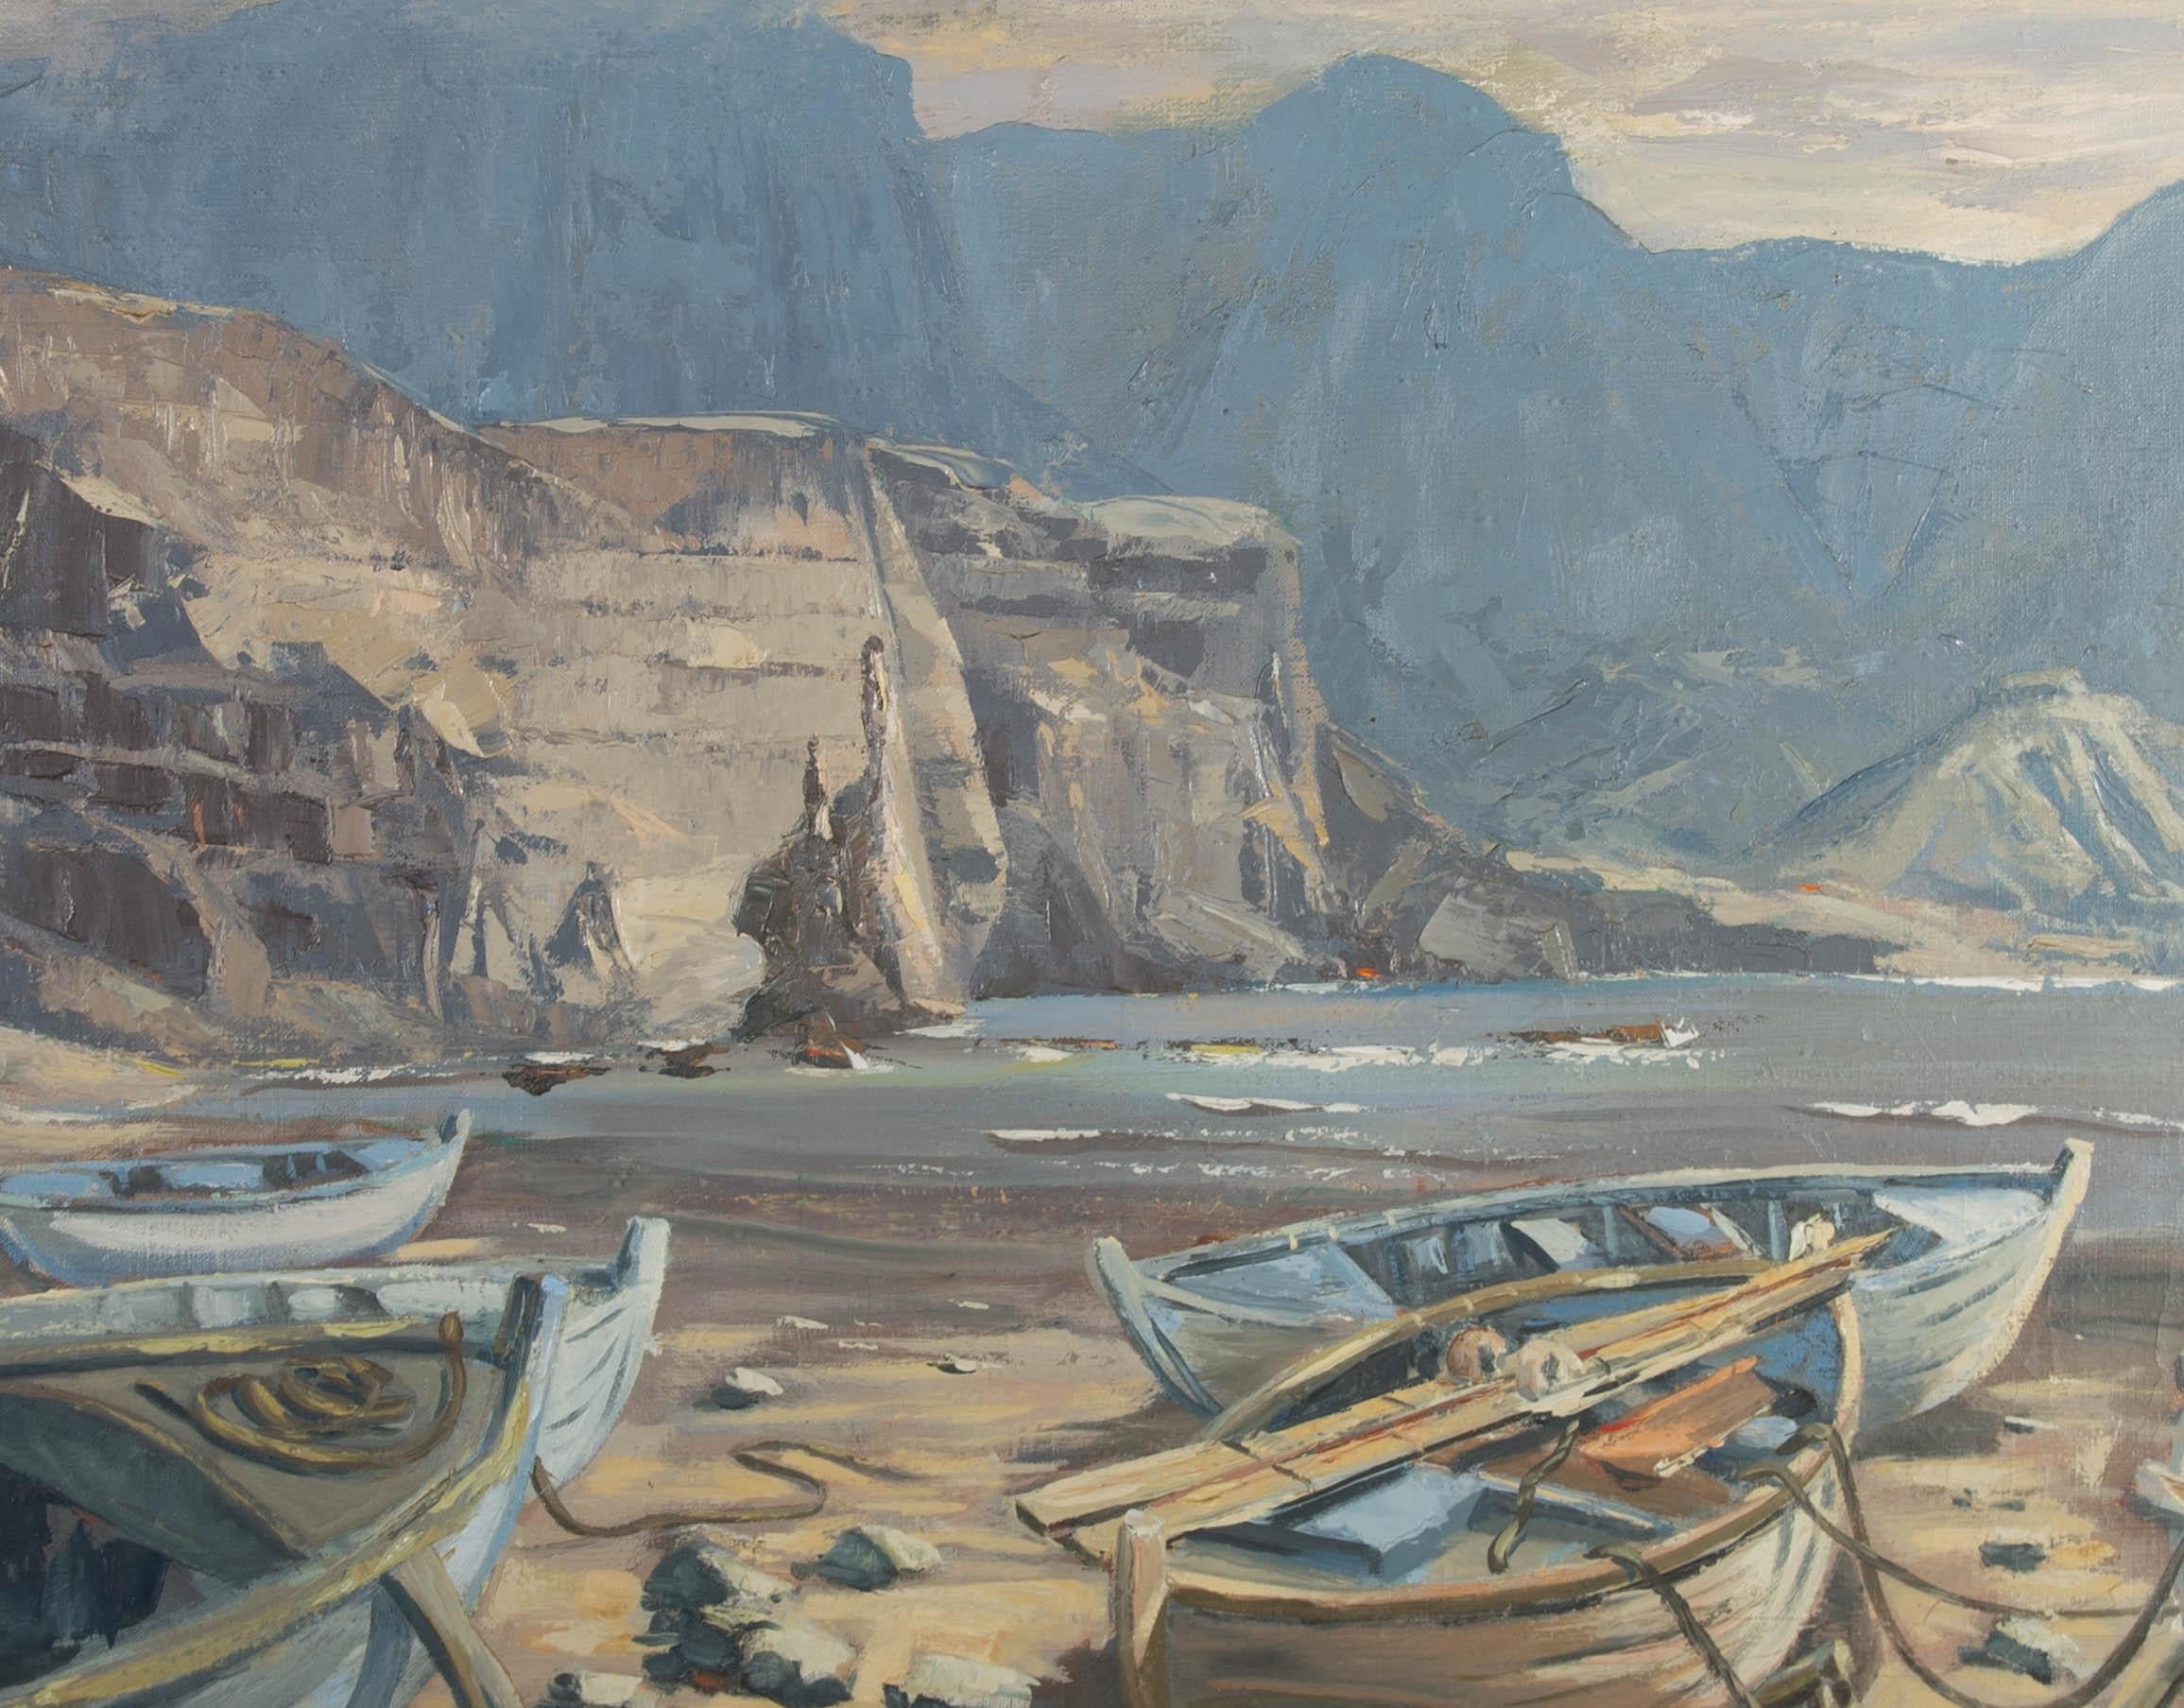 This fine oil study is titled 'The Barren Rocks of Aden' which is a march tune associated with the Highlander's Regiment. In the foreground row boats sit beached on the sand before choppy waters and towering cliffs. The artist has used a muted